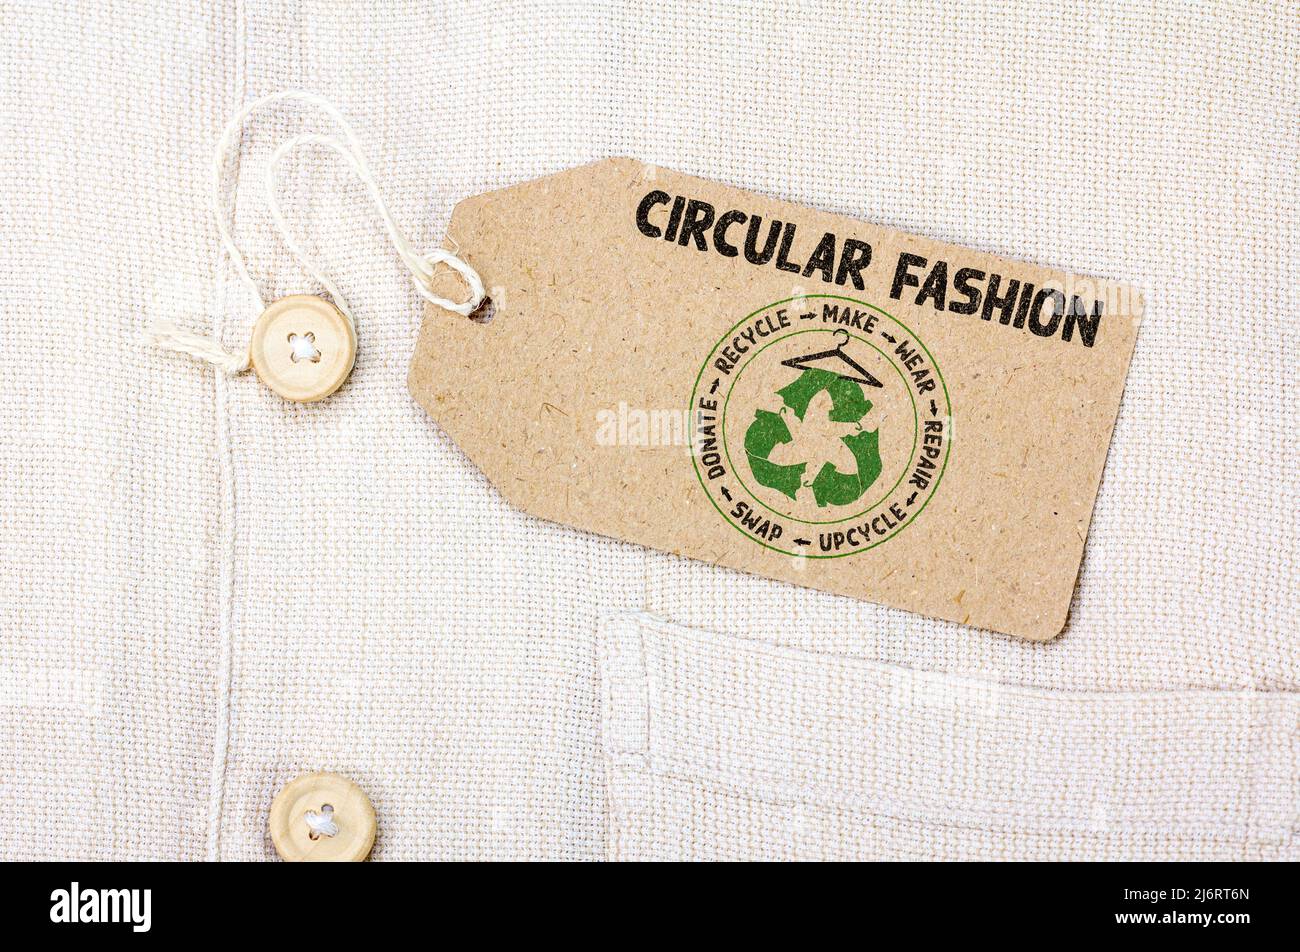 Circular Fashion label on jumper, , make, wear, repair, upcycle, swap, donate, recycle with eco clothes recycle icon sustainable fashion concept Stock Photo